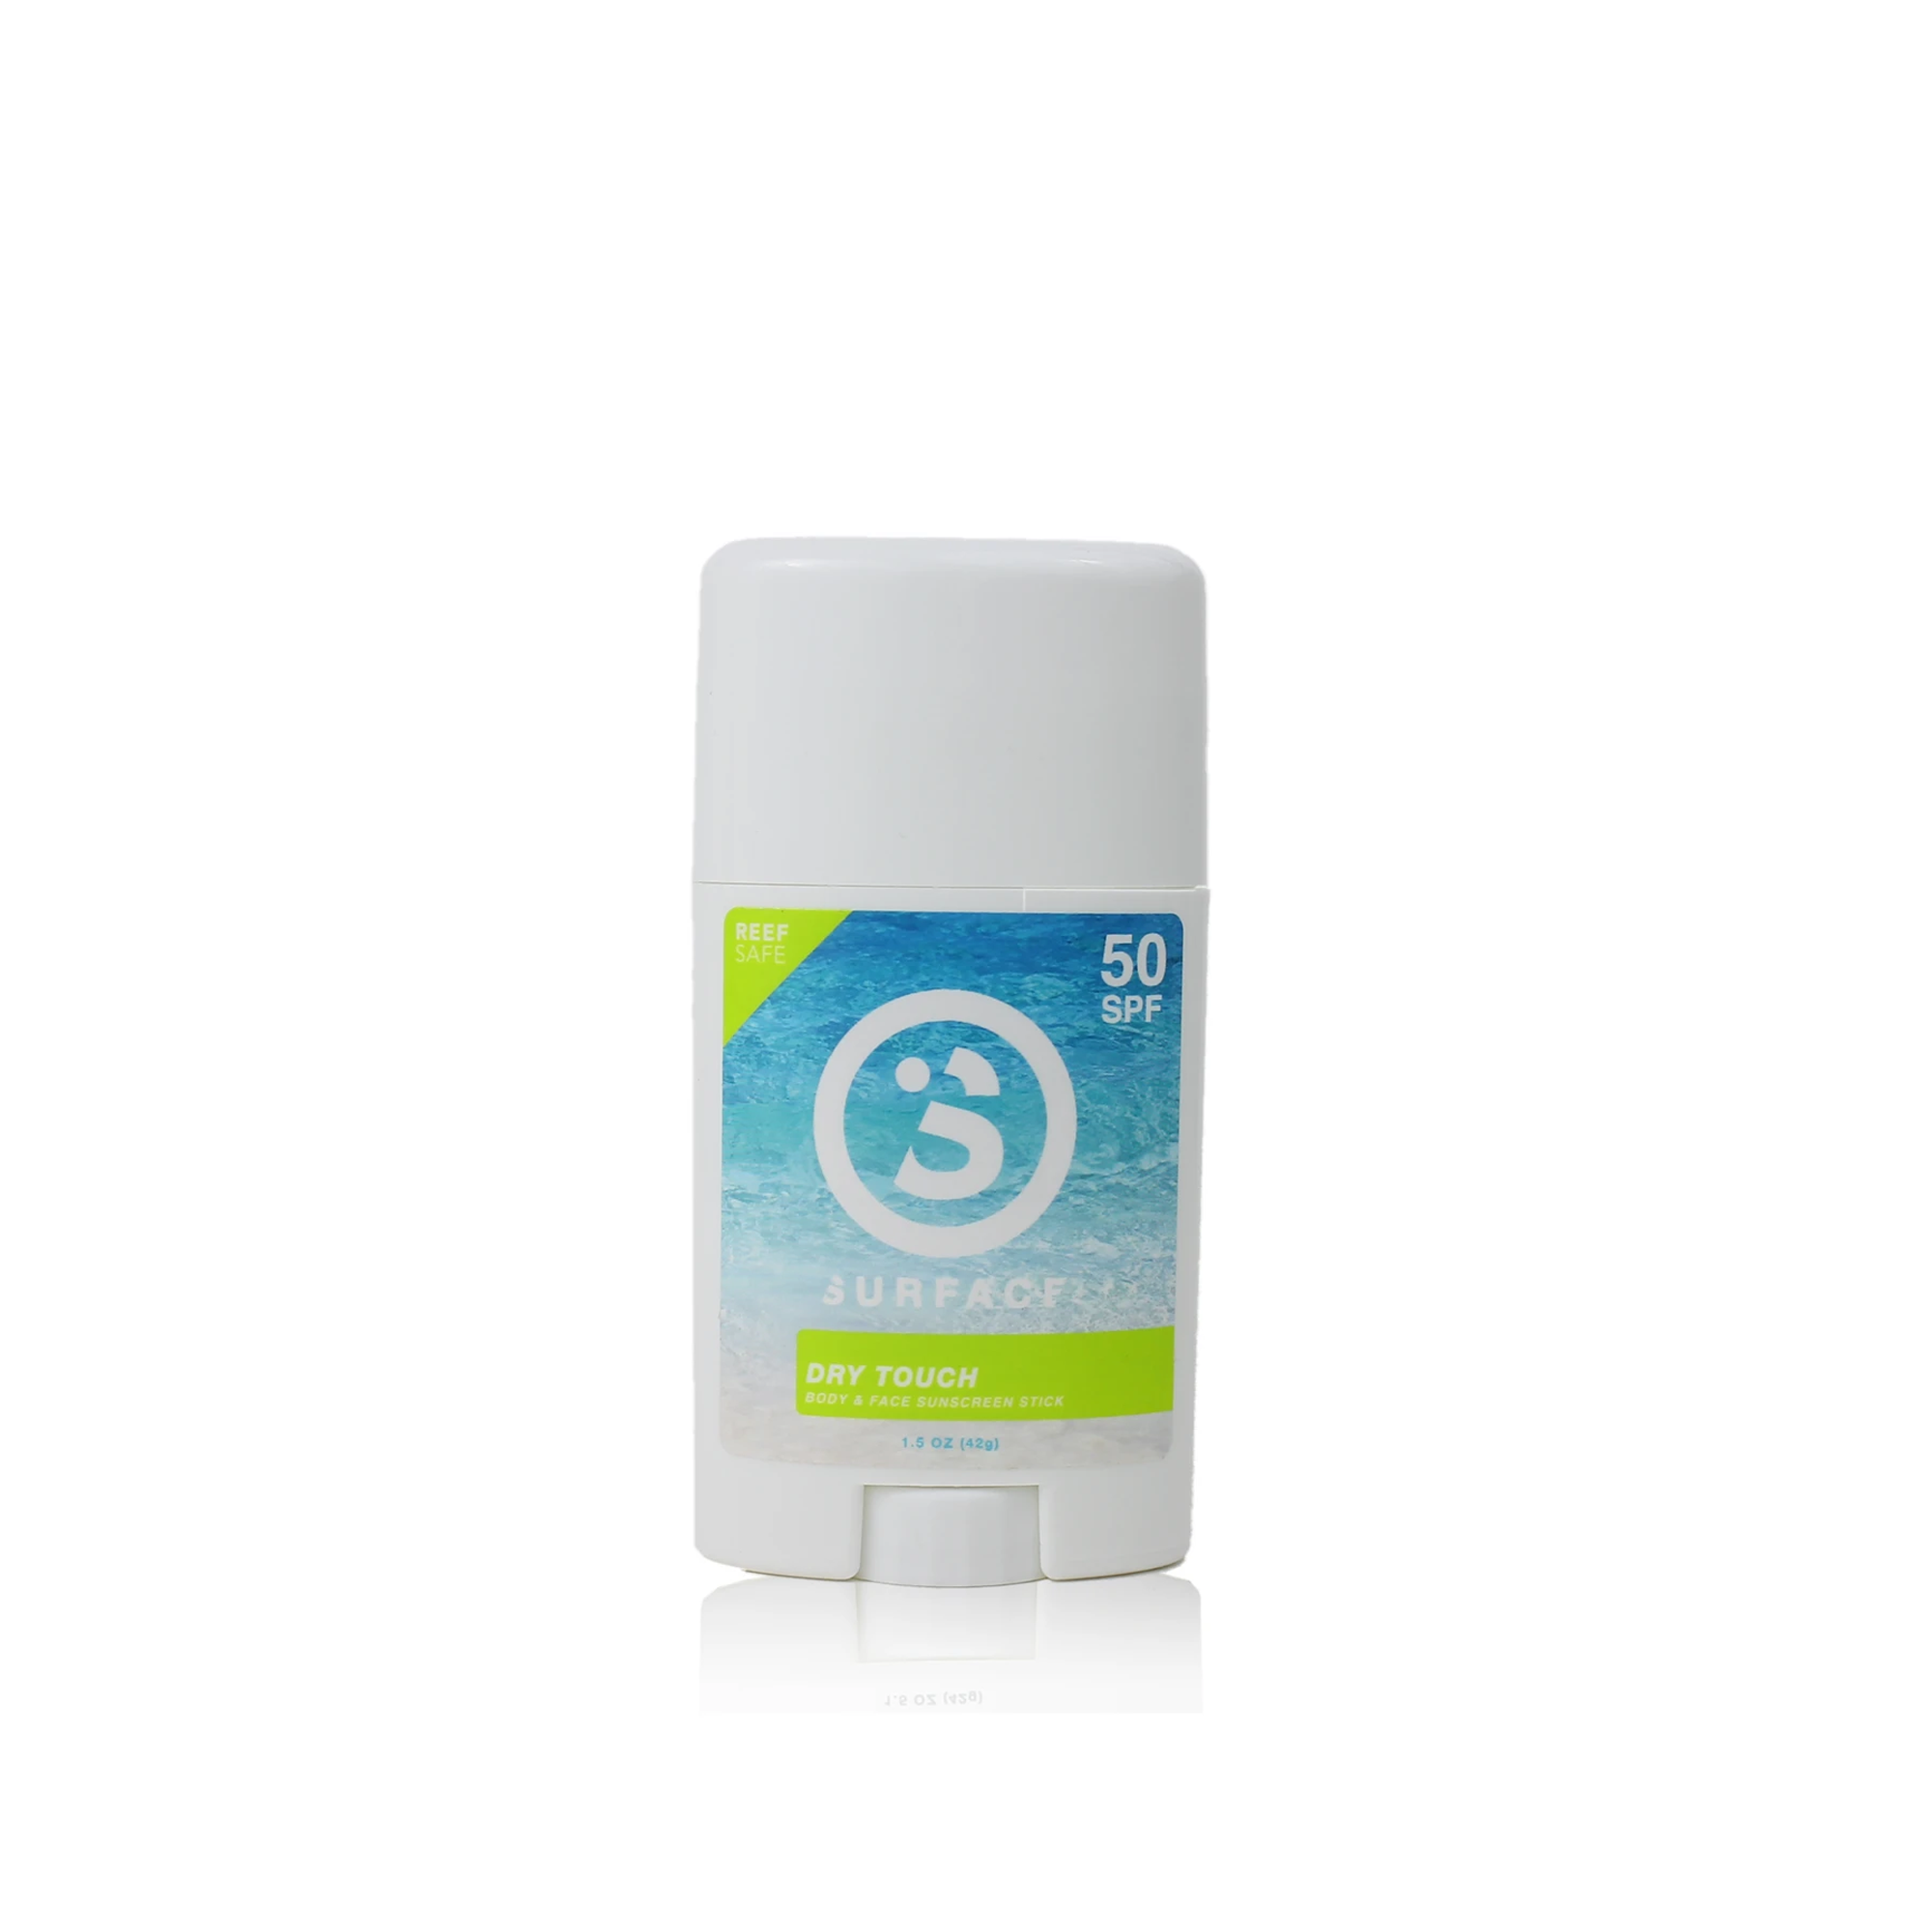 Surface Dry Touch Body/Face SPF 50 Sunscreen Stick